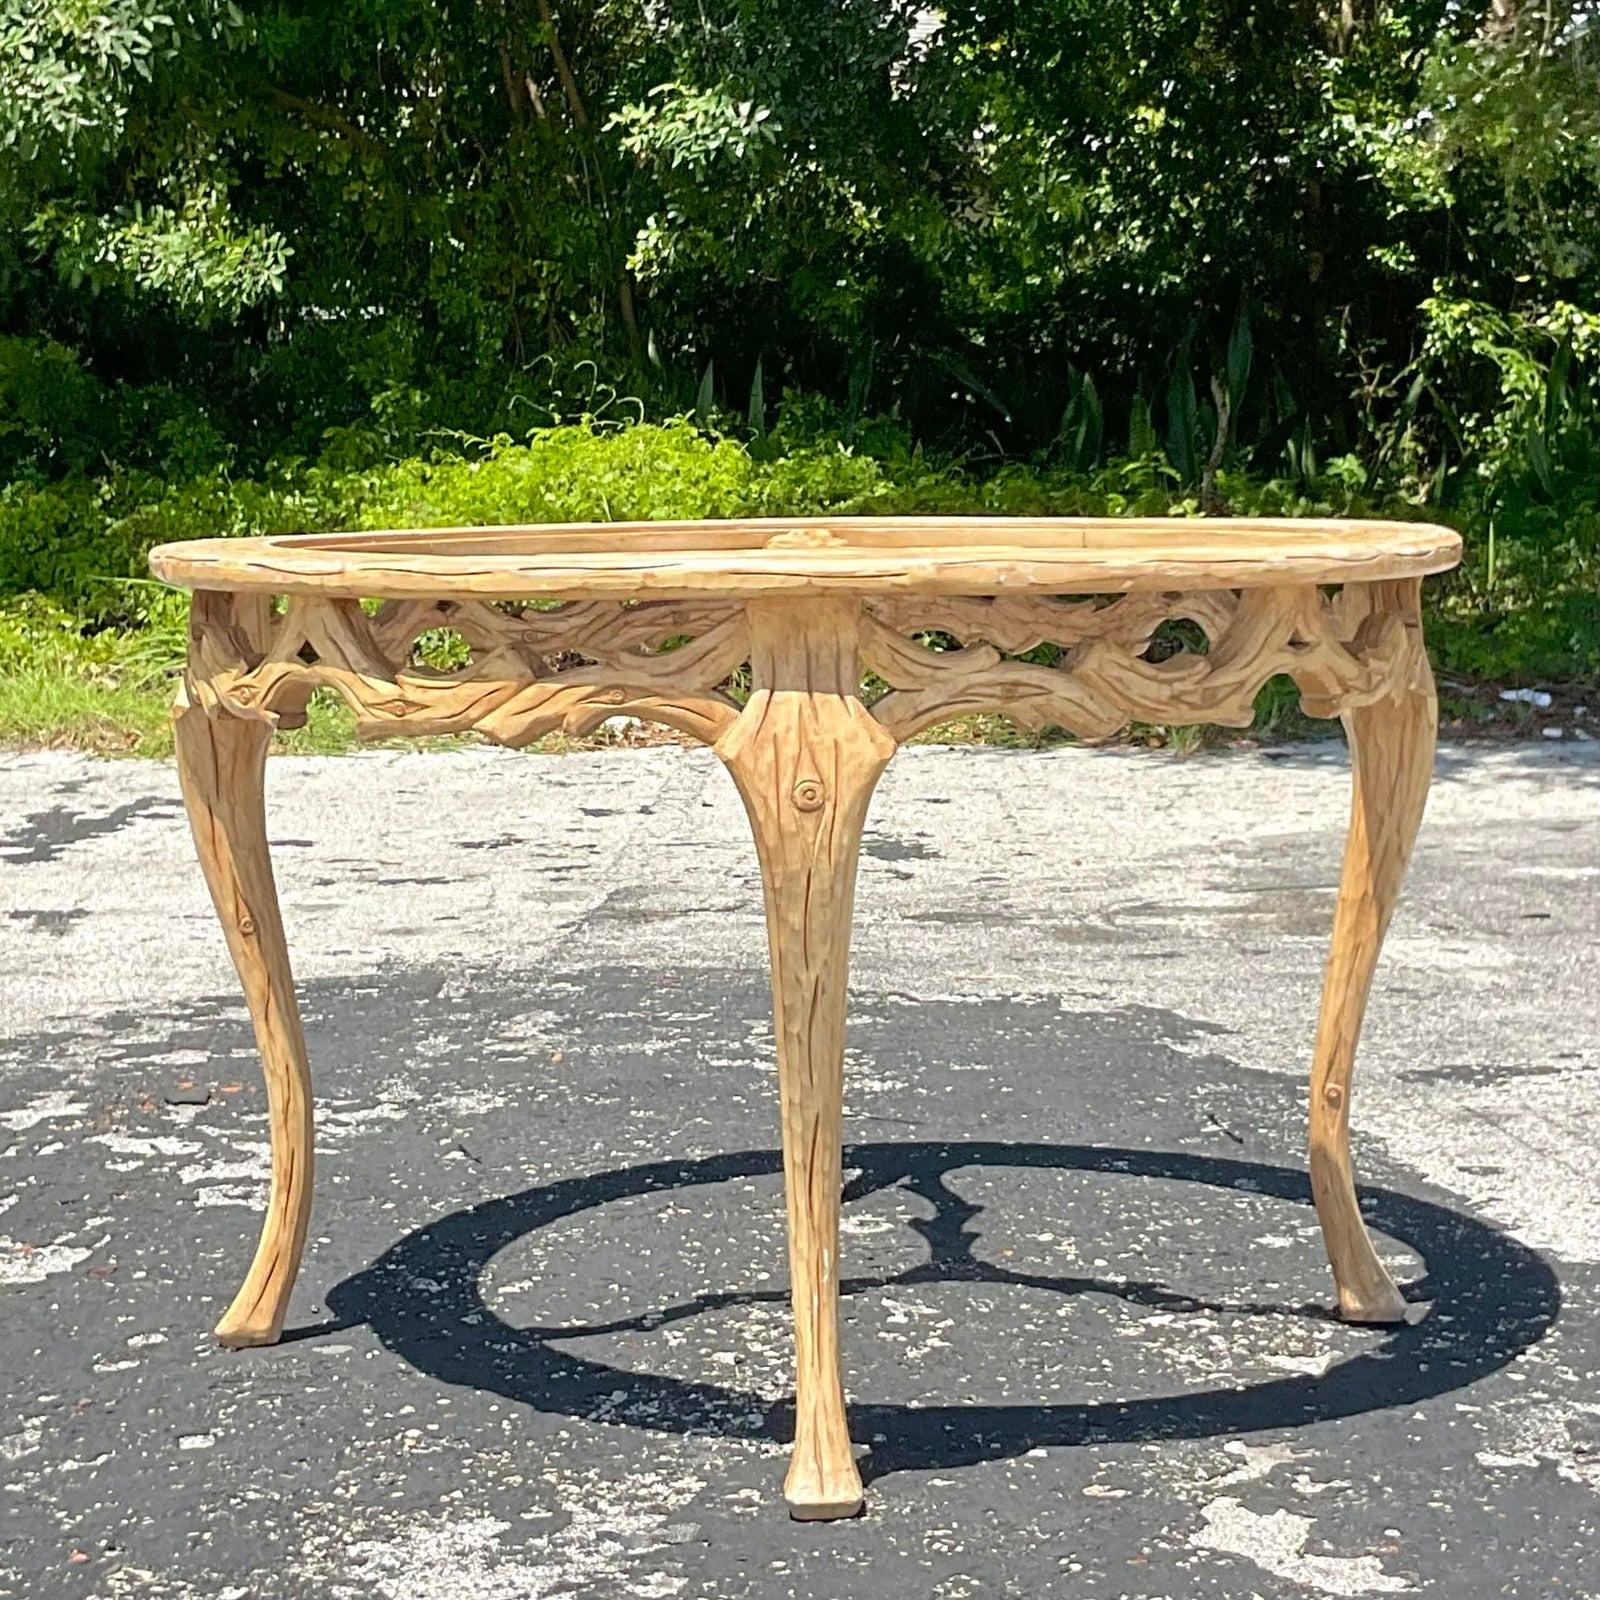 A stunning vintage Regency dining table. Beautiful hand carved detail in a classic Faux Bois design. Inset glass top. Acquired from a Palm Beach estate.

The table is in great structural shape. No scratches to the glass. The table would benefit from